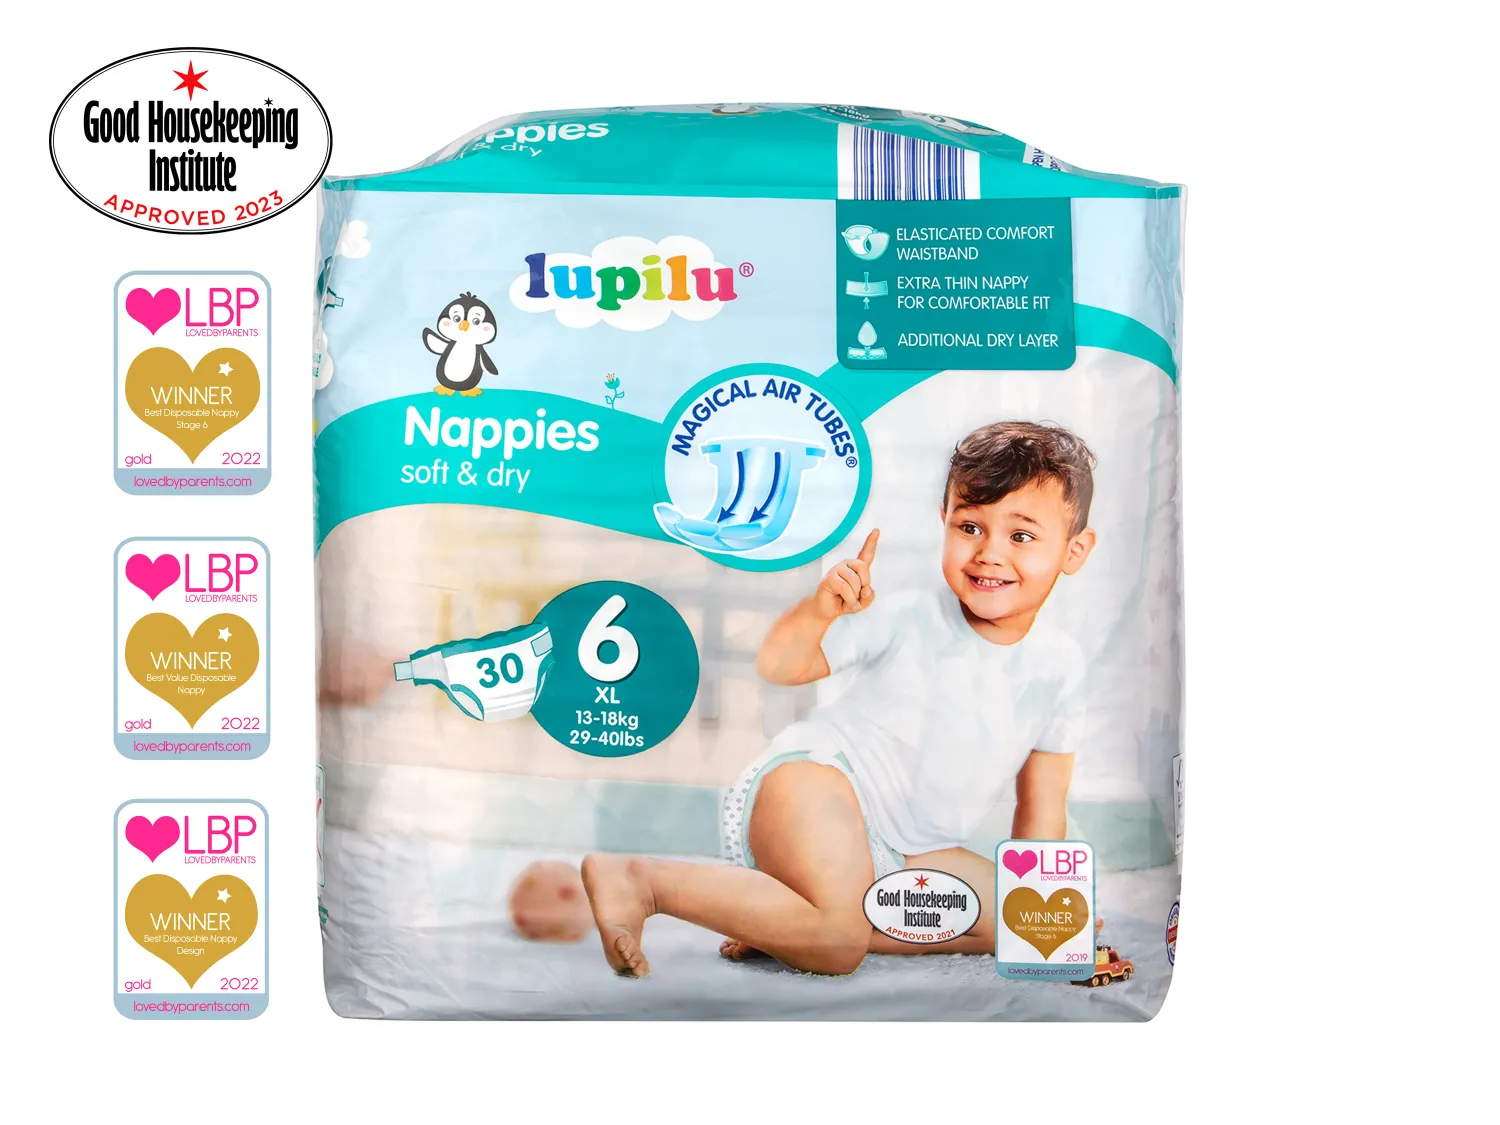 pampers active baby 6 extra large lidl